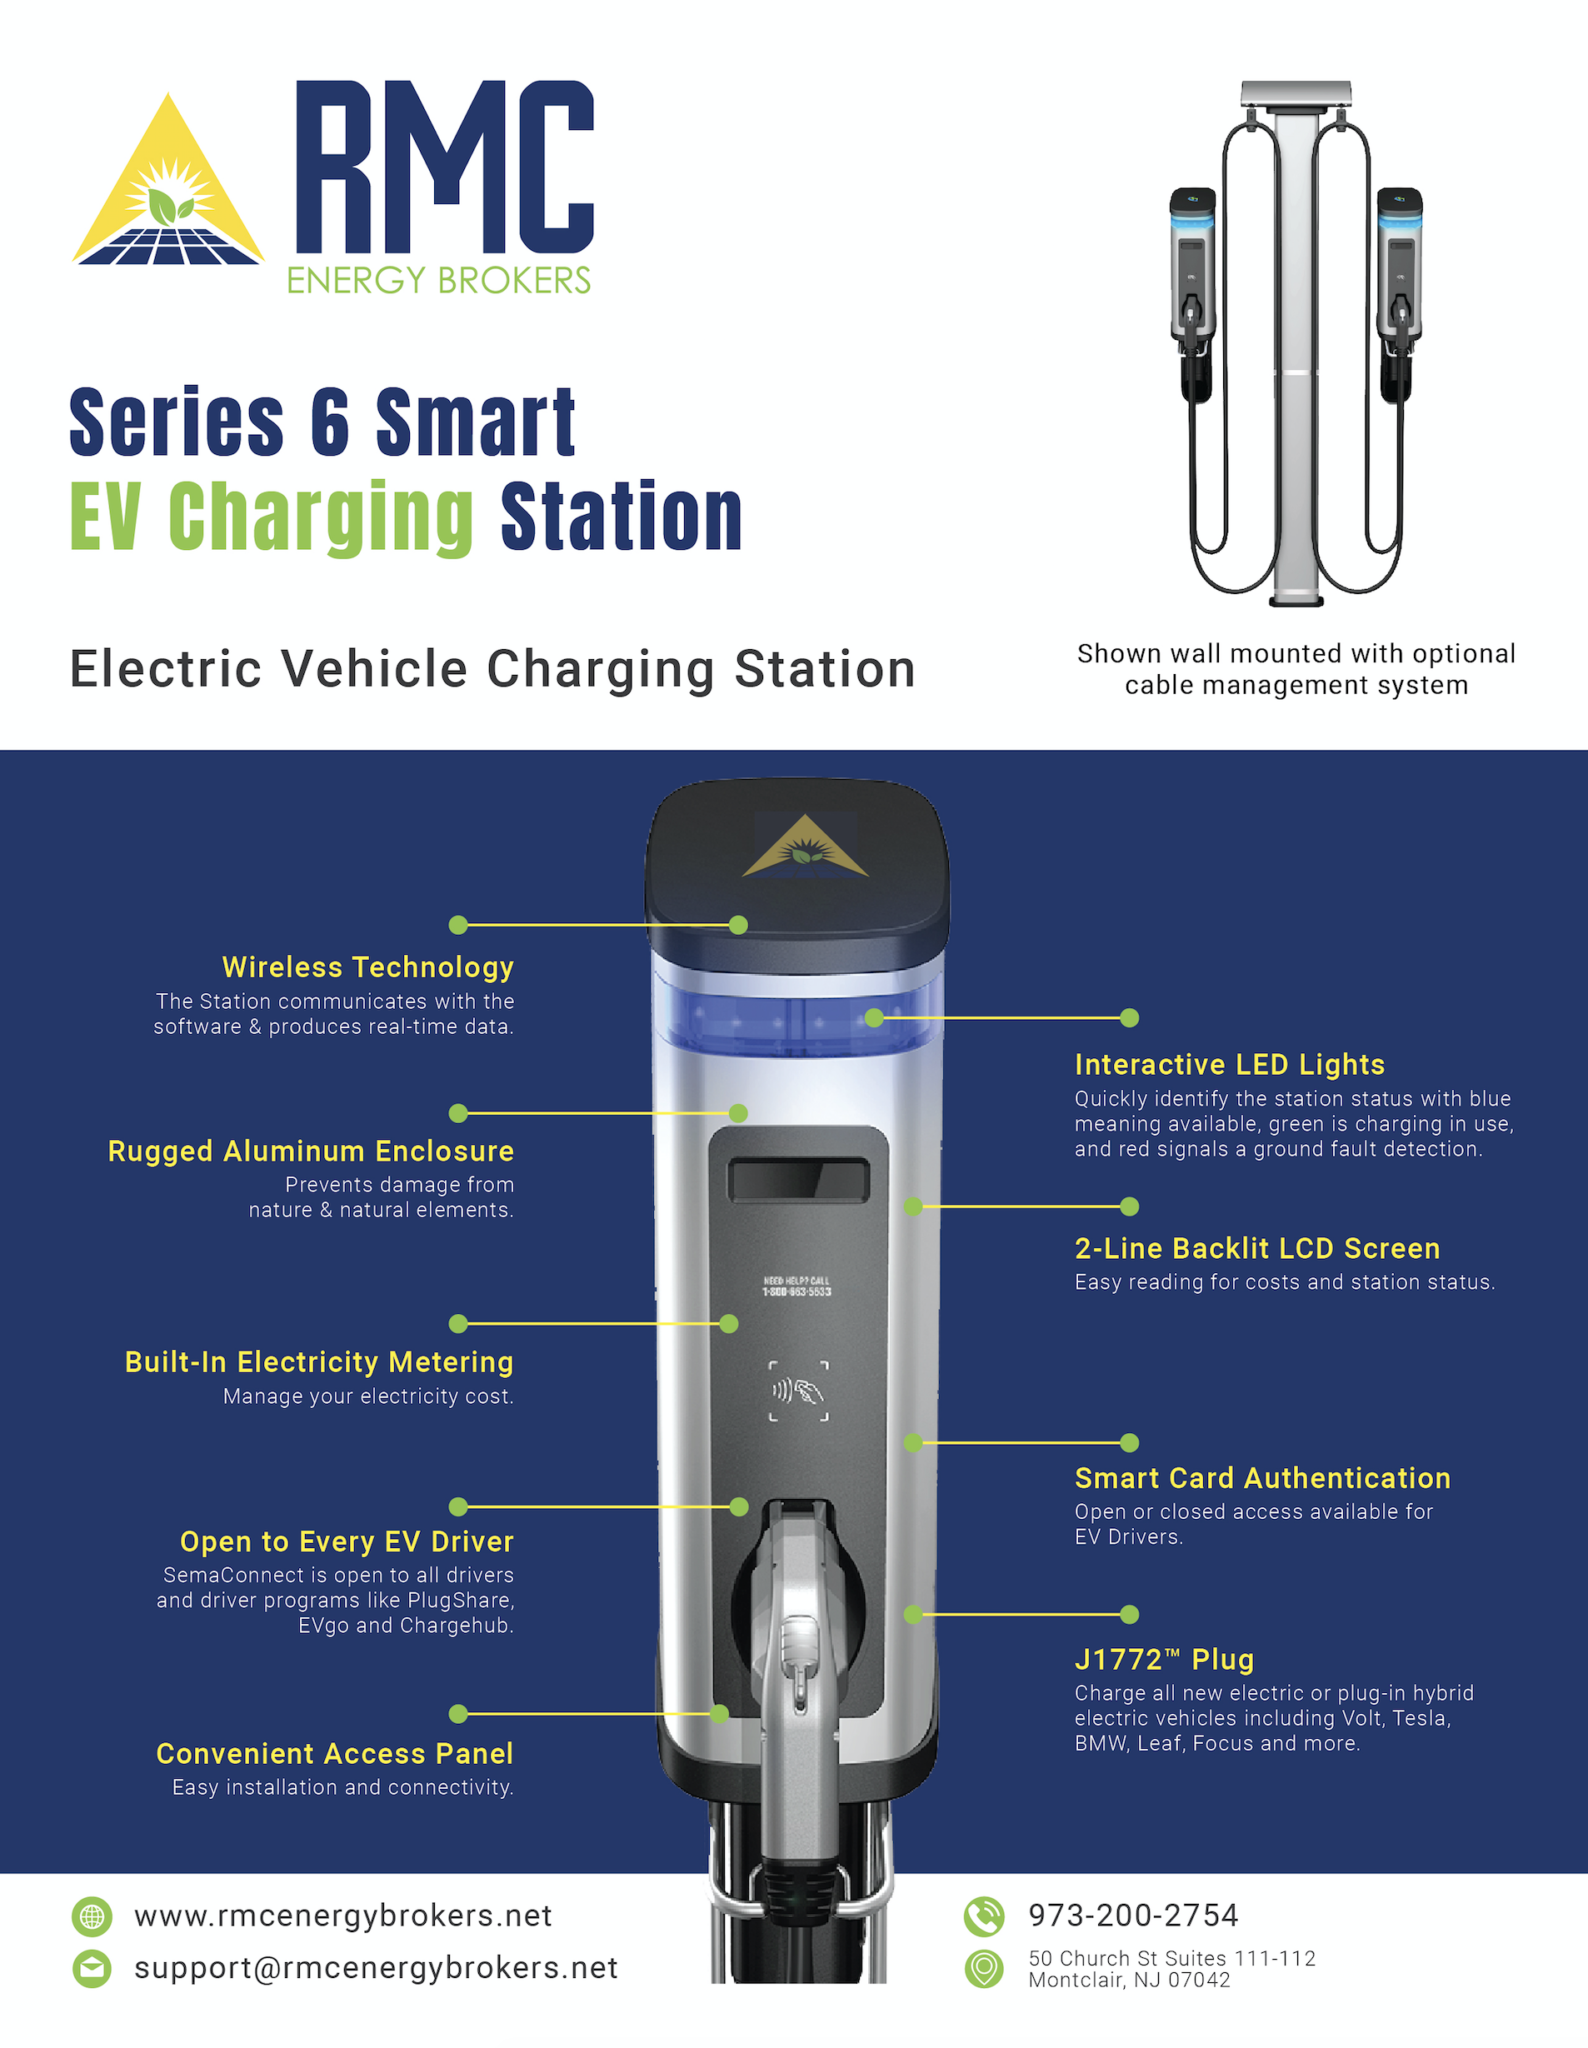 50-solar-ev-charging-stations-go-up-in-new-york-city